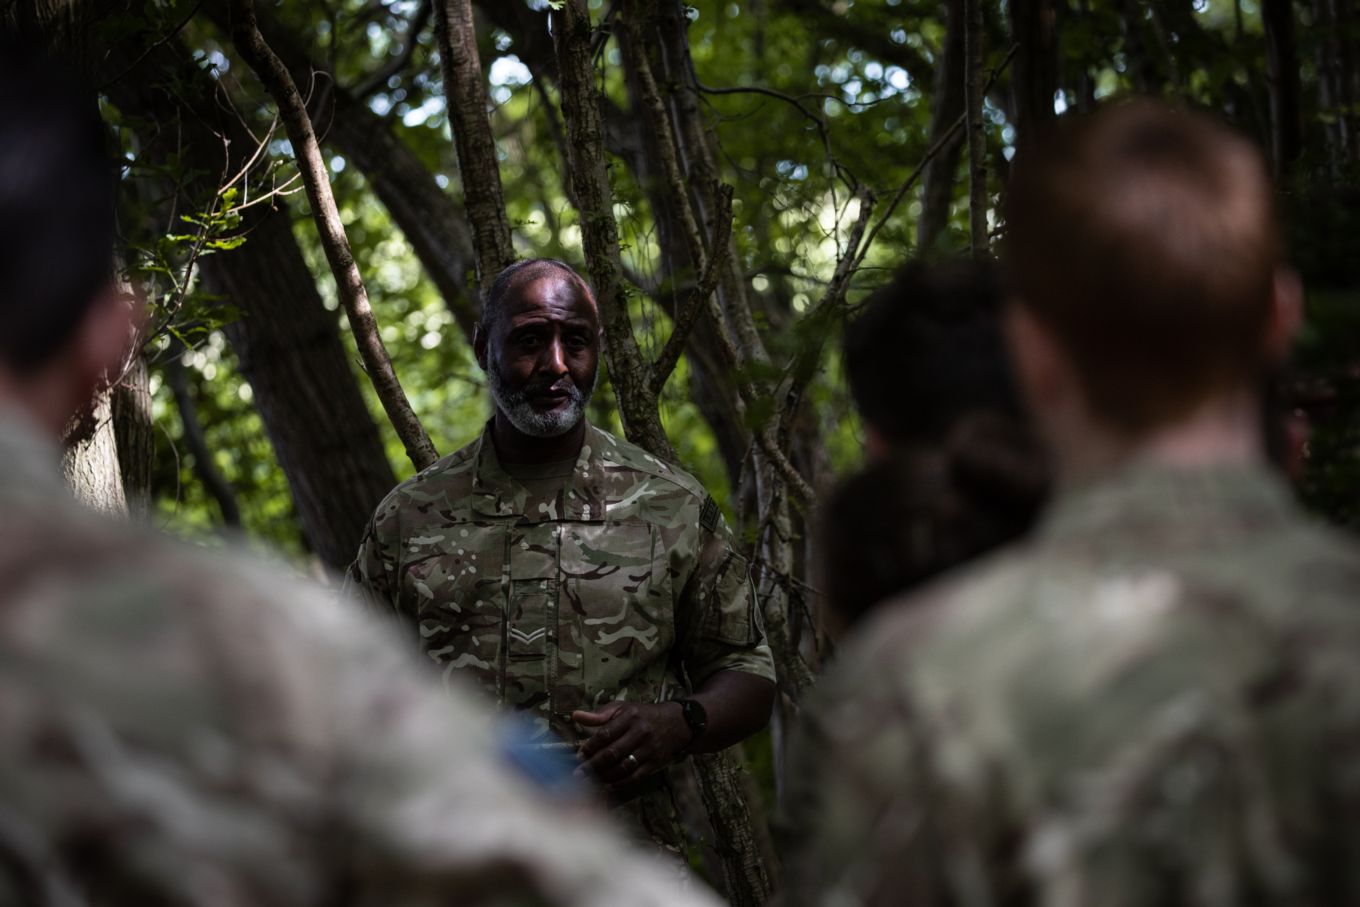 Cpl Errol Robinson from No 504 (County of Nottingham) Squadron teaching fieldcraft skills at RAF Wittering during phase one of the exercise